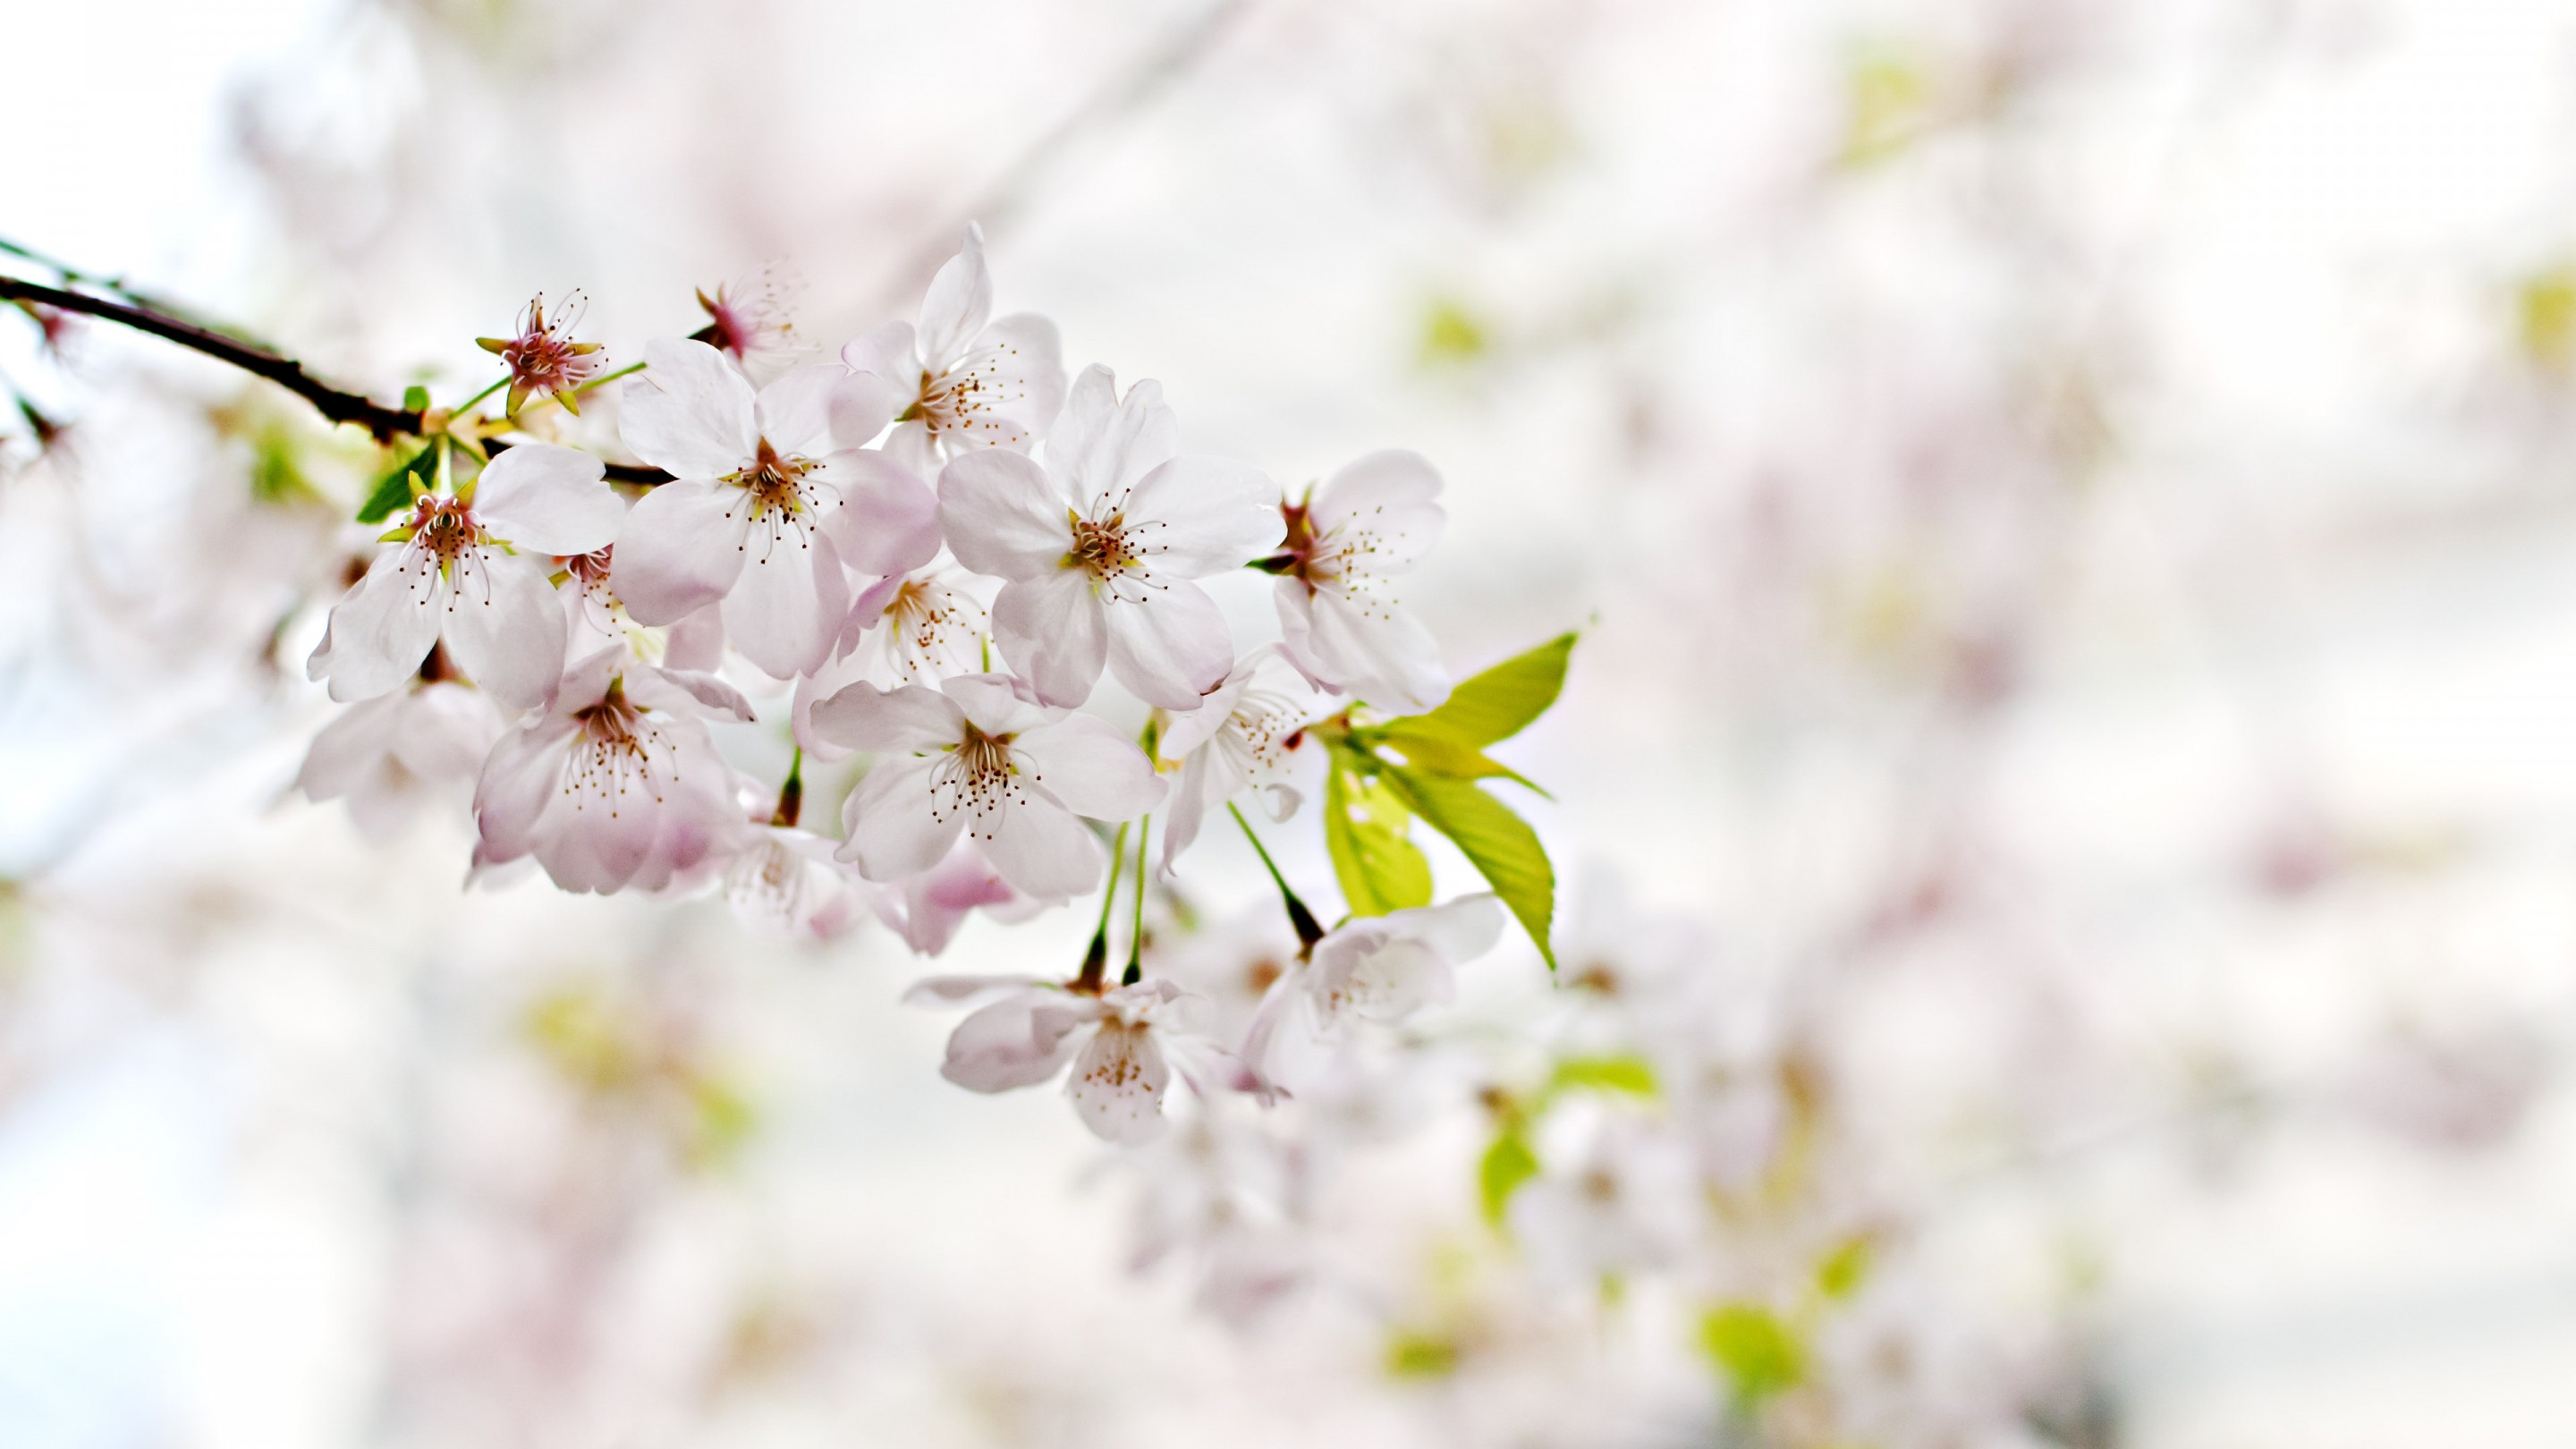 Cherry Blossoms. Flowers of Spring wallpaper 2880x1620